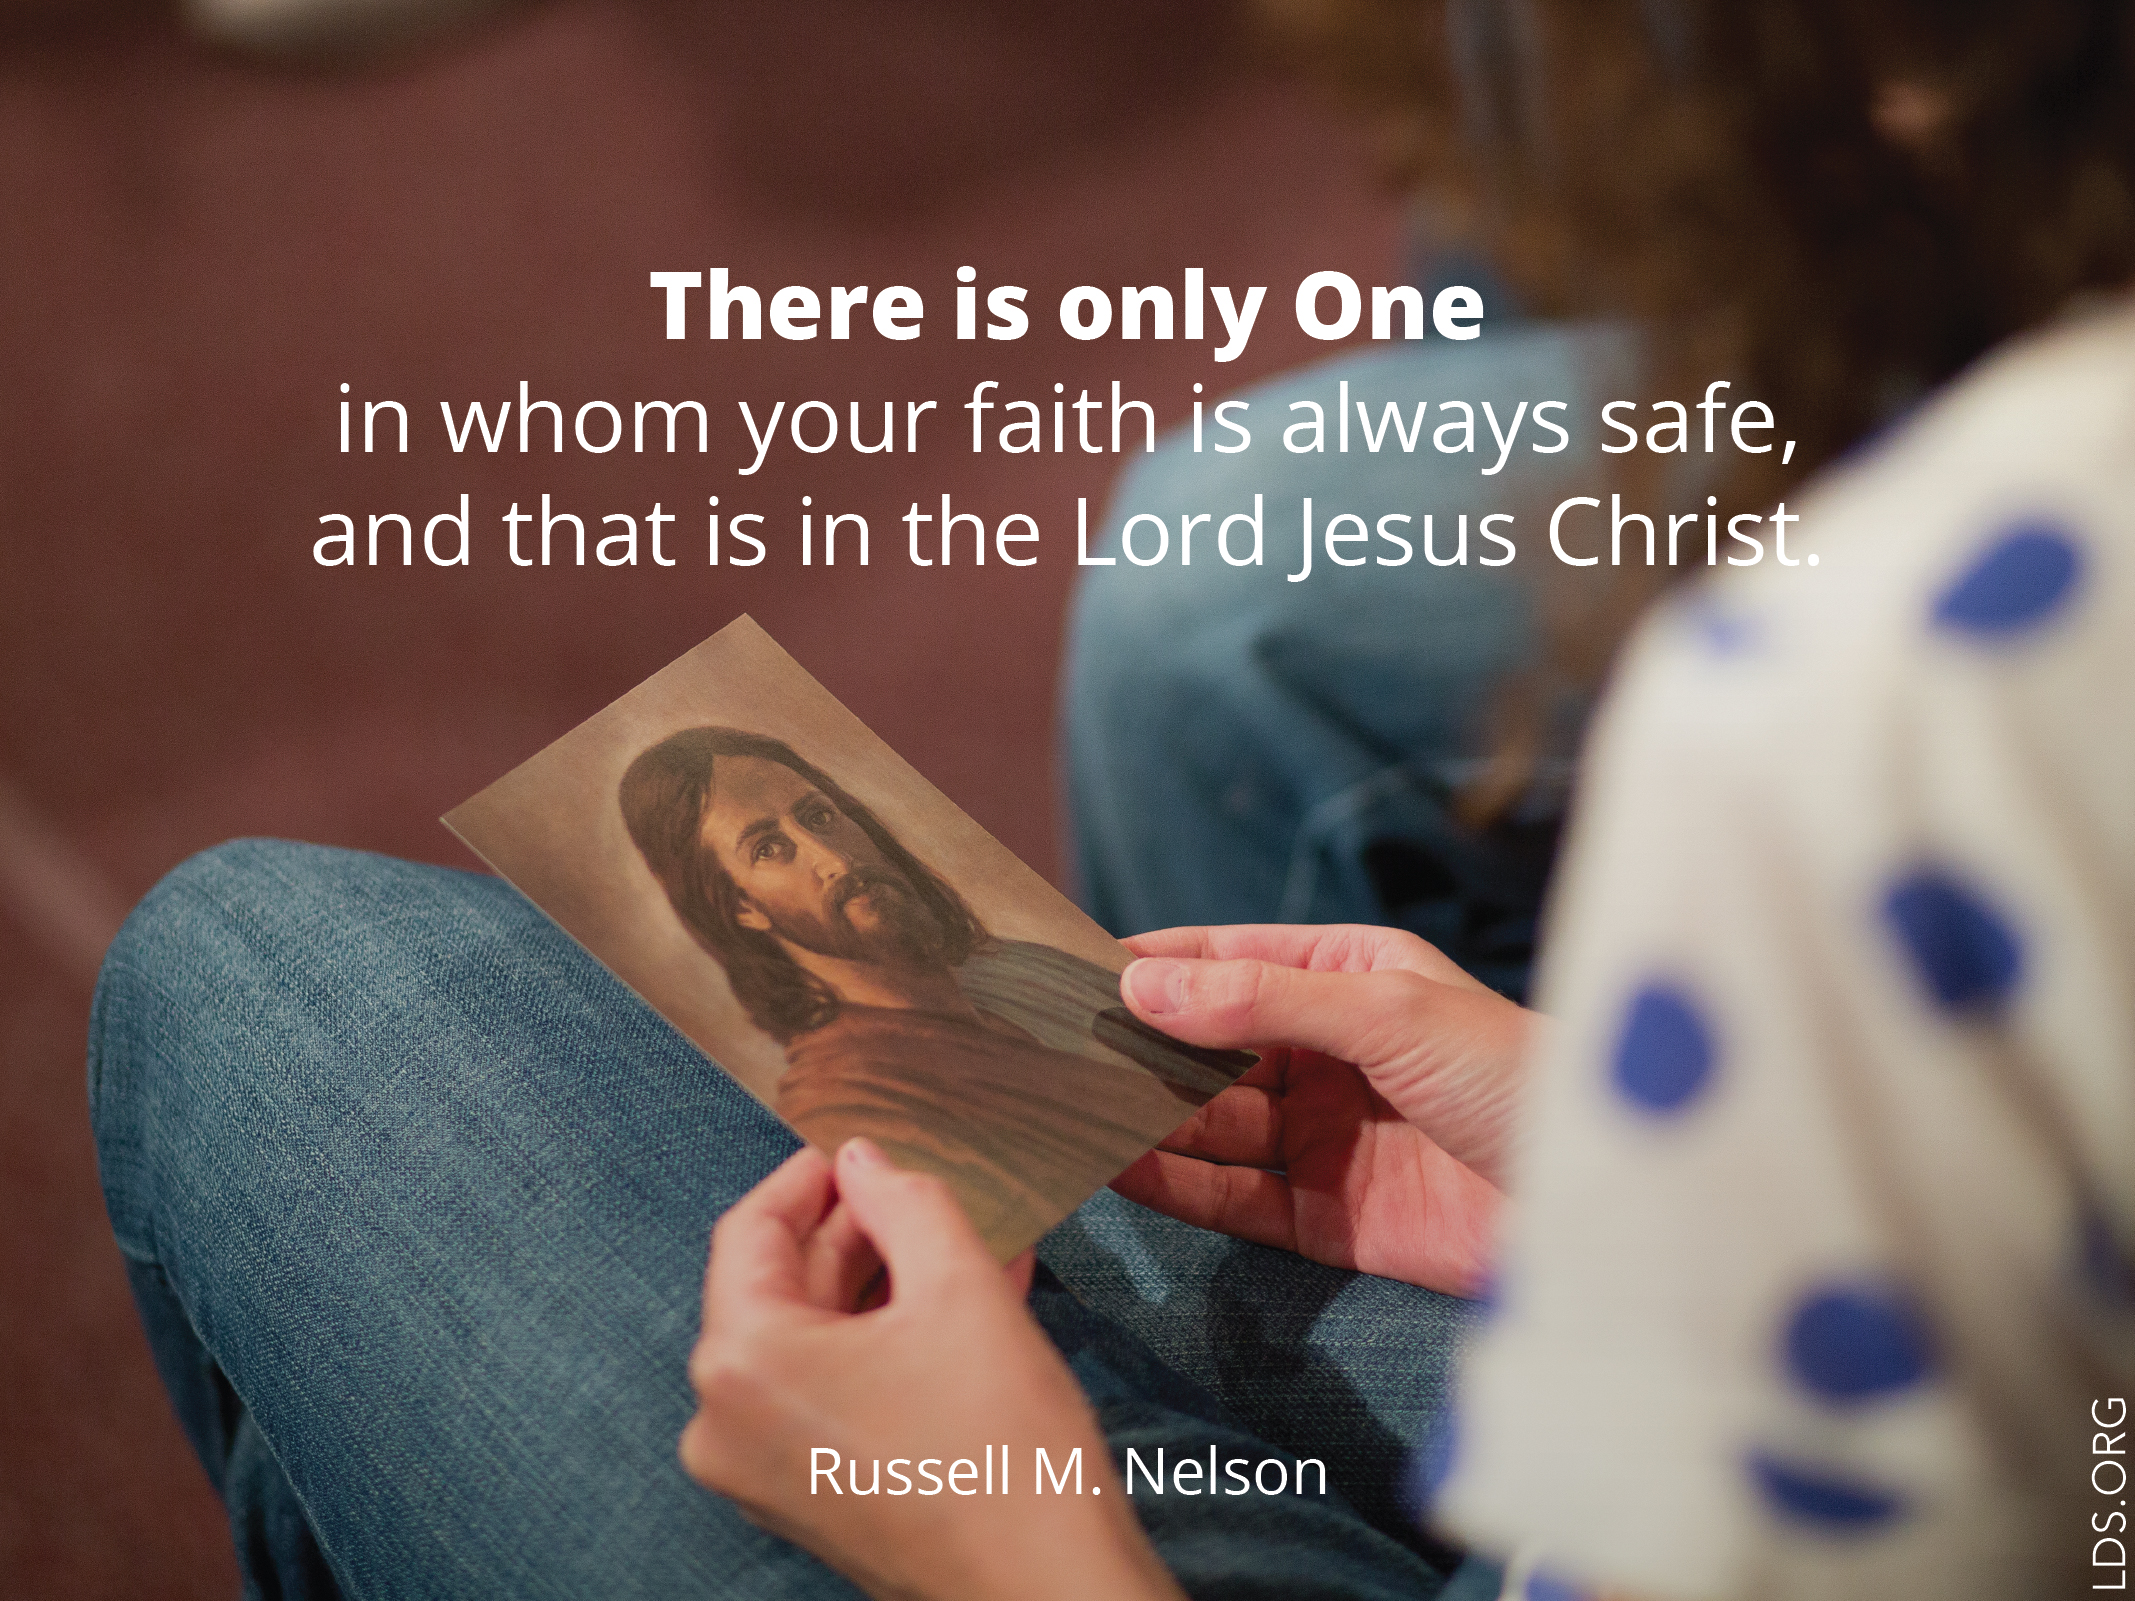 A photograph of a girl holding an image of Christ, with a quote by President Russell M. Nelson: “Your faith is always safe … in the Lord Jesus Christ.”